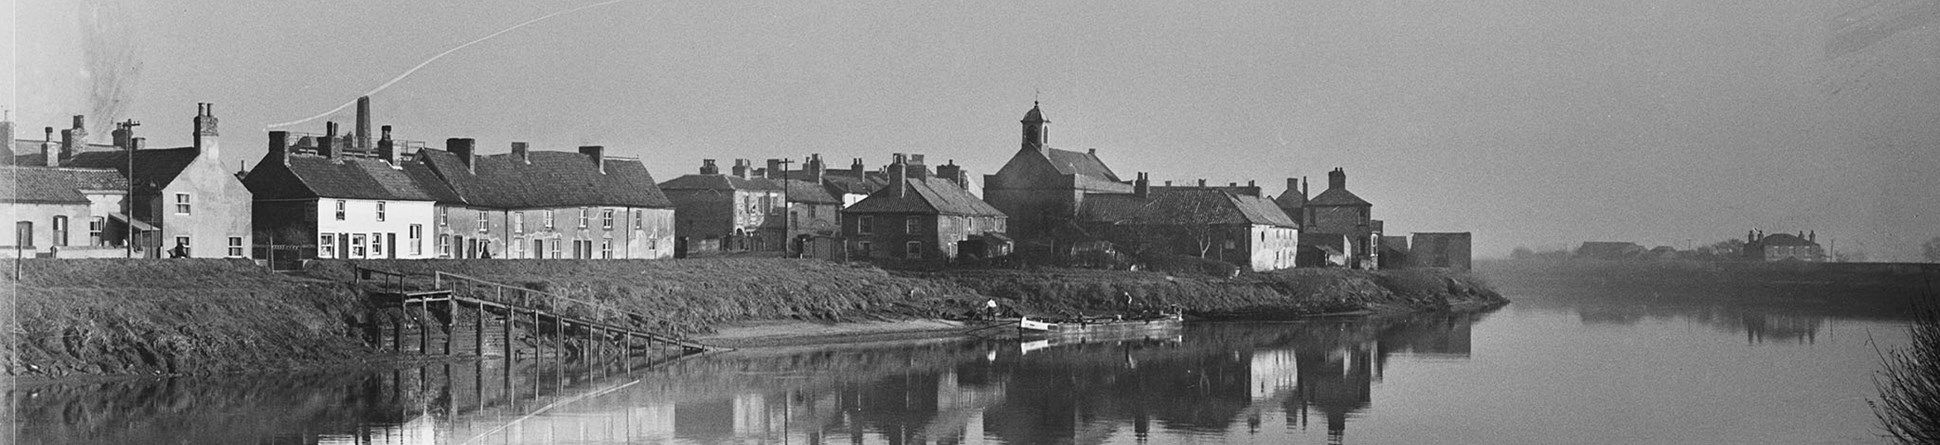 Black and white archive photograph of a townscape viewed across a river.